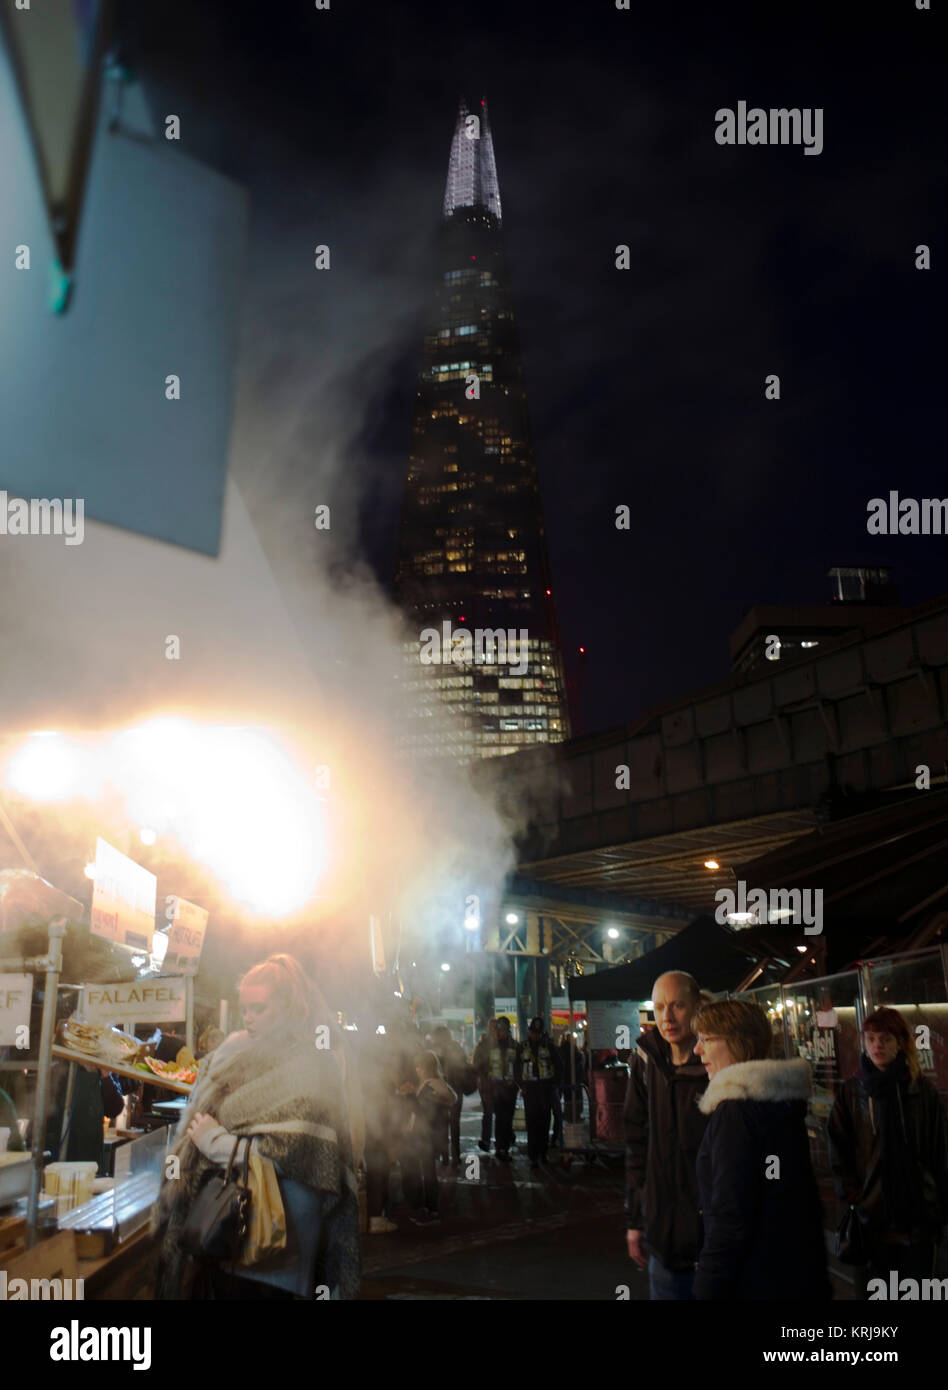 The Shard skyscraper towers above food stalls as evening falls over Borough Market, in London, Britain December 19, 2017 Stock Photo